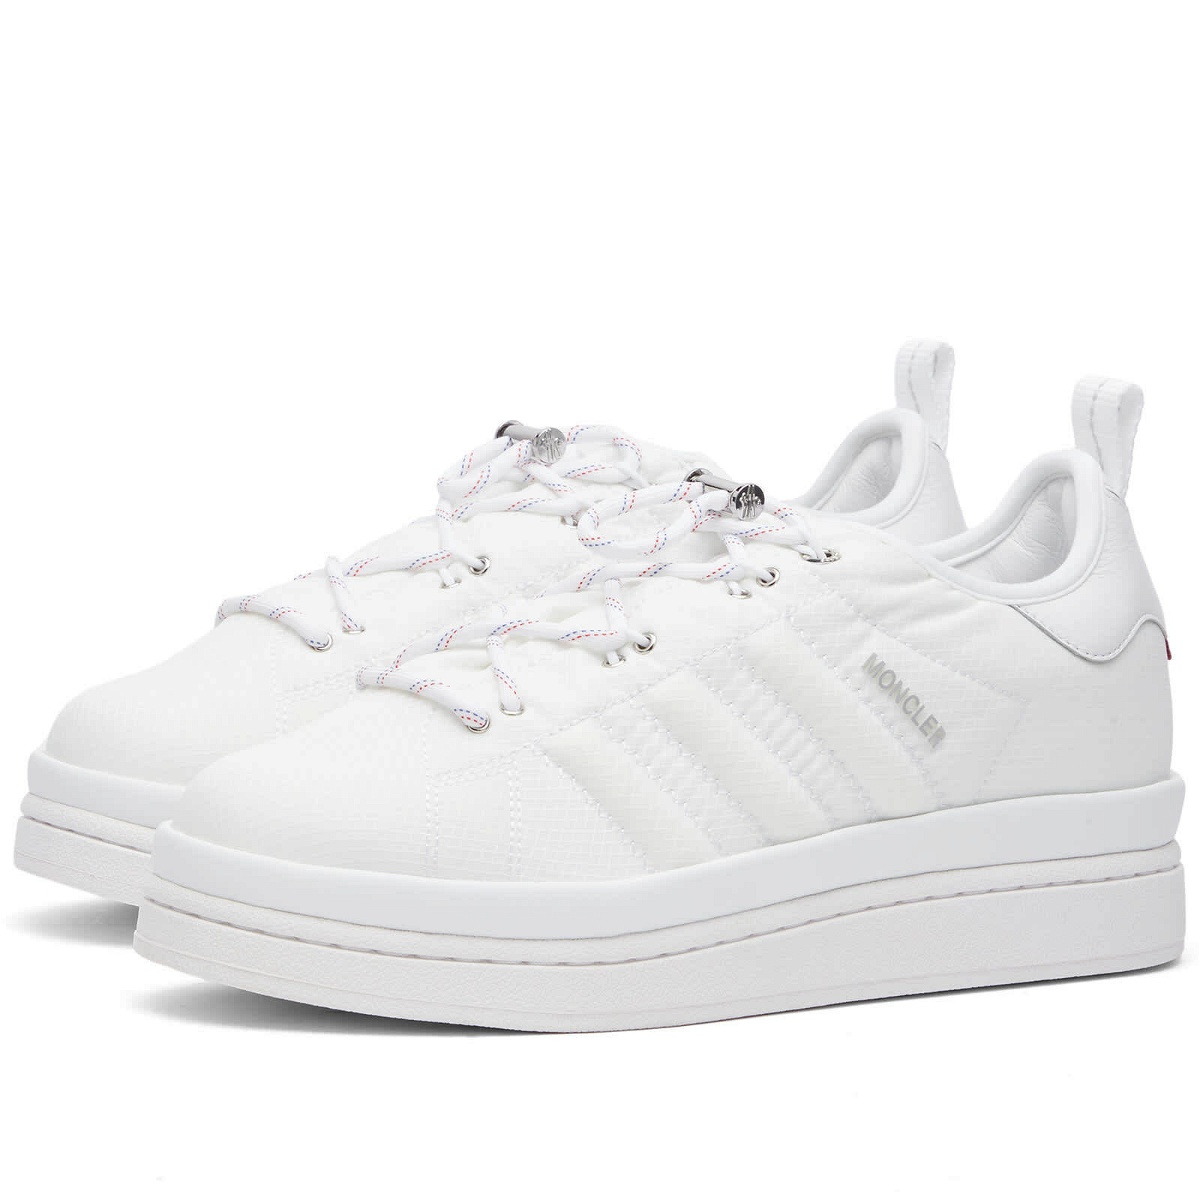 Photo: Moncler x adidas Originals Campus Sneakers in White